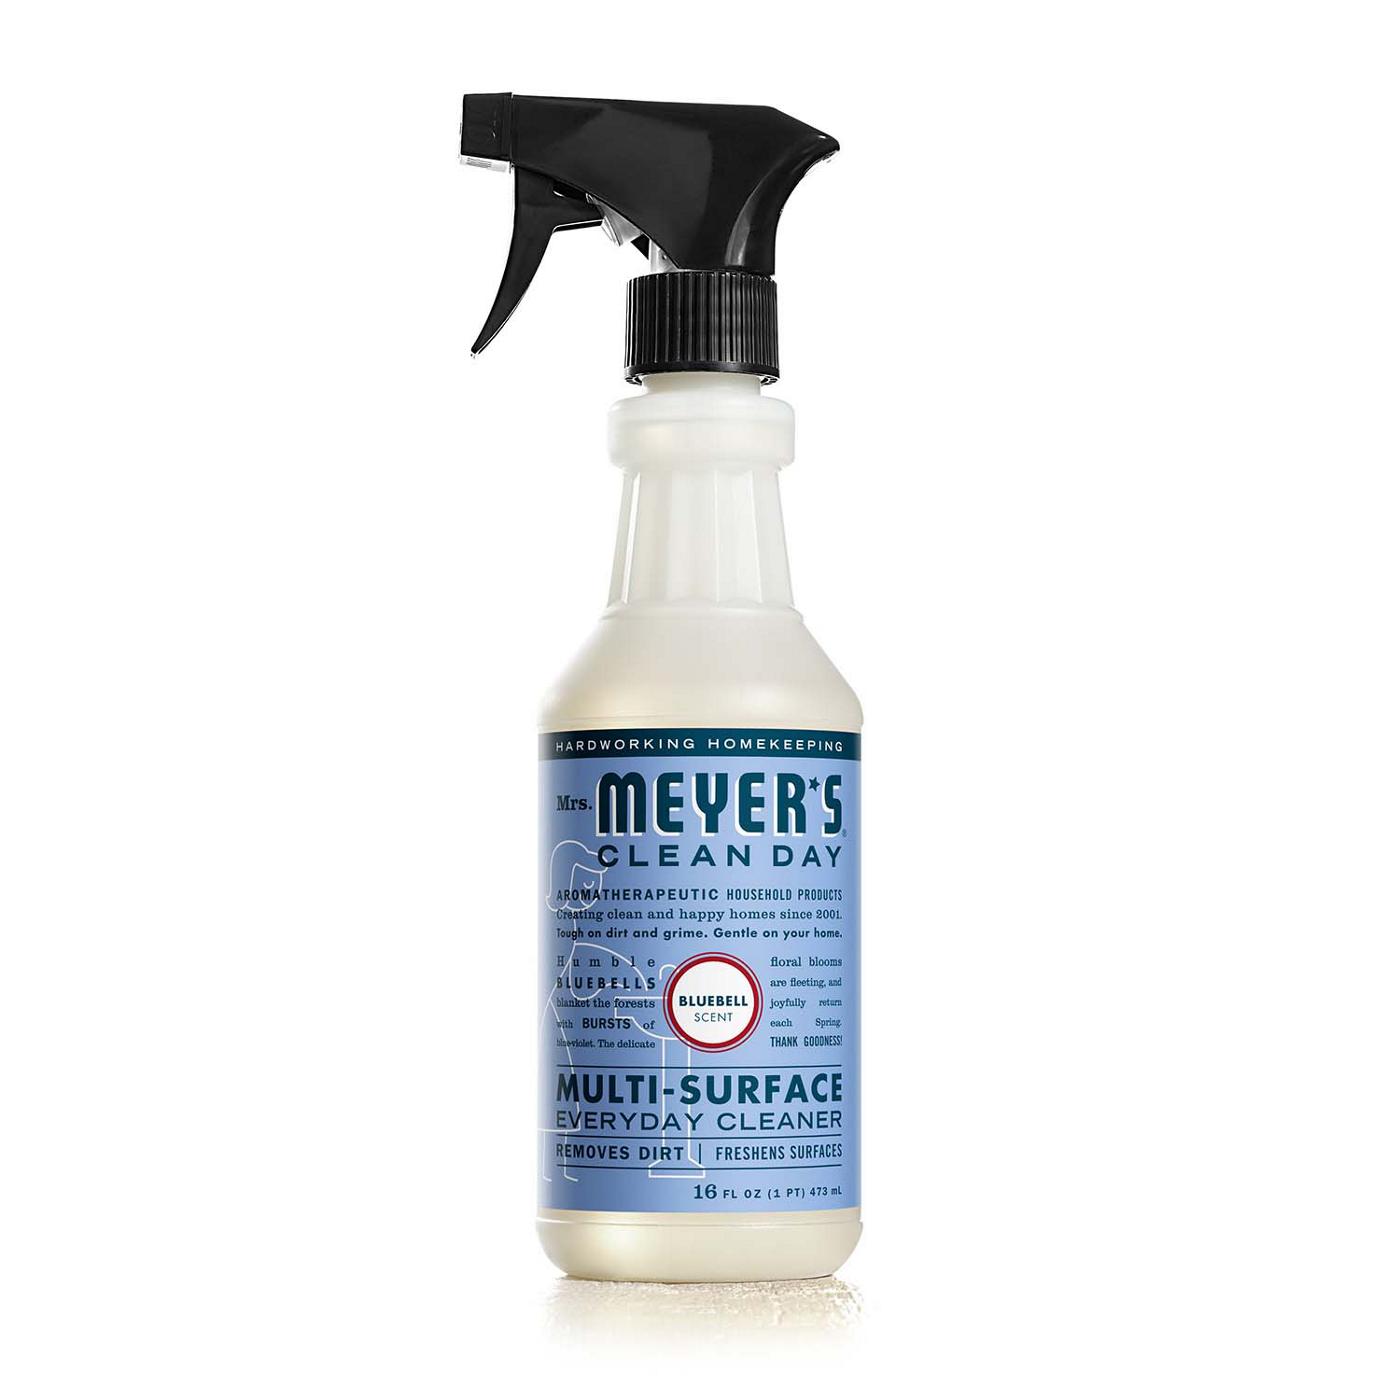 Mrs. Meyer's Clean Day Bluebell Scent Multi-Surface Everyday Cleaner Spray; image 1 of 6